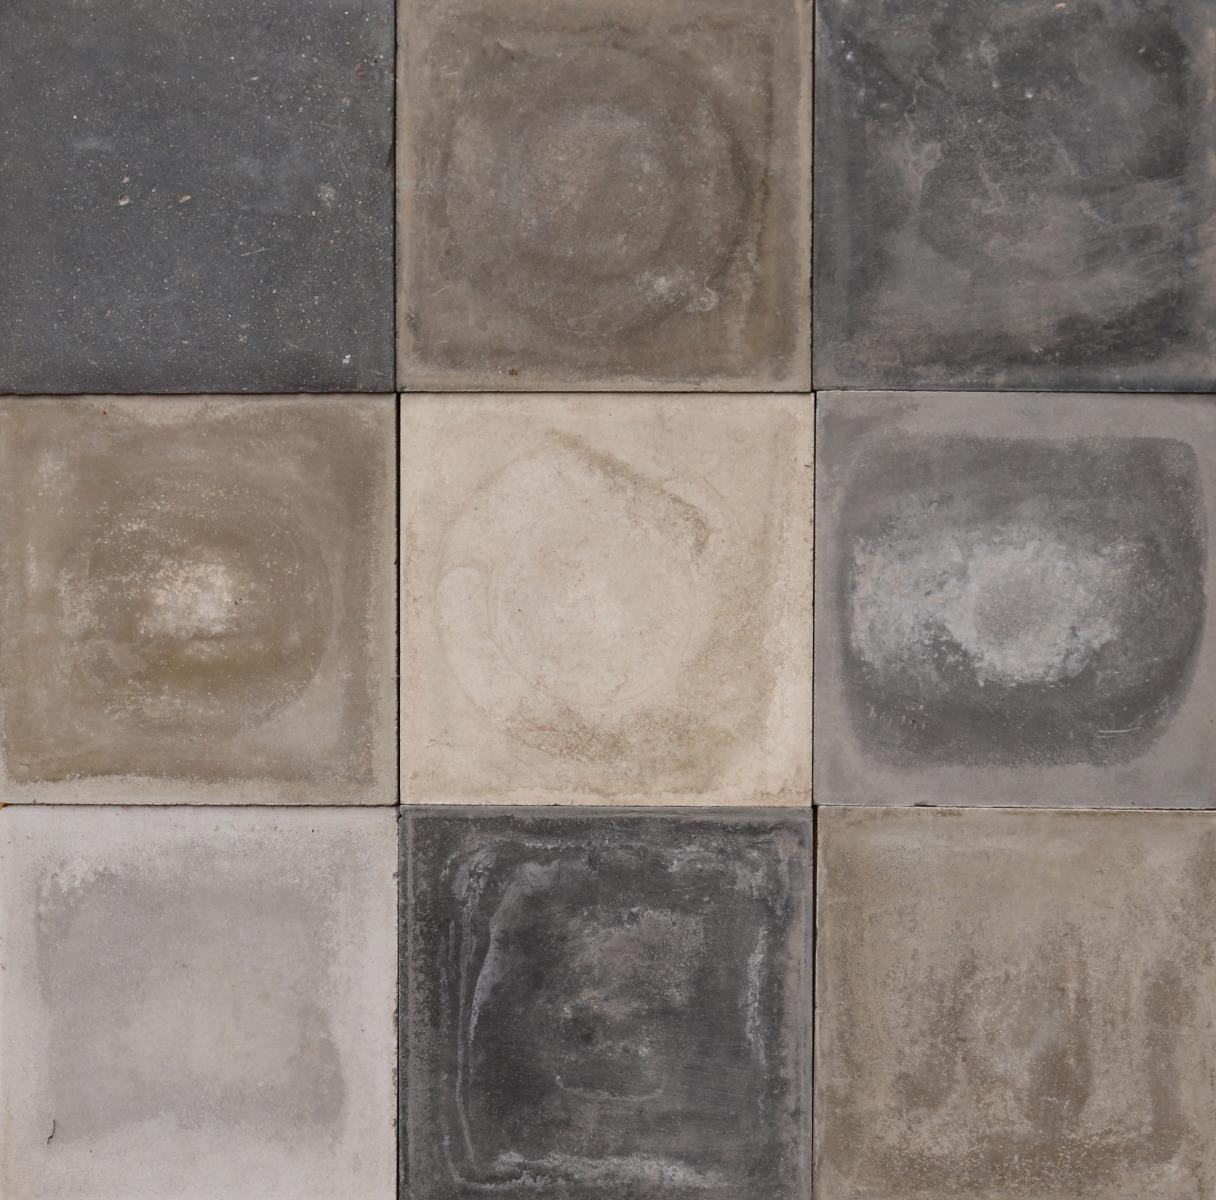 A batch of 351 reclaimed encaustic cement floor tiles. These tiles will cover 14m2 or 151 sq ft. They are suitable for use on floors or walls.

Mixed shades of grey, including olive and dark creams.

Weathered surfaces and small chips associated